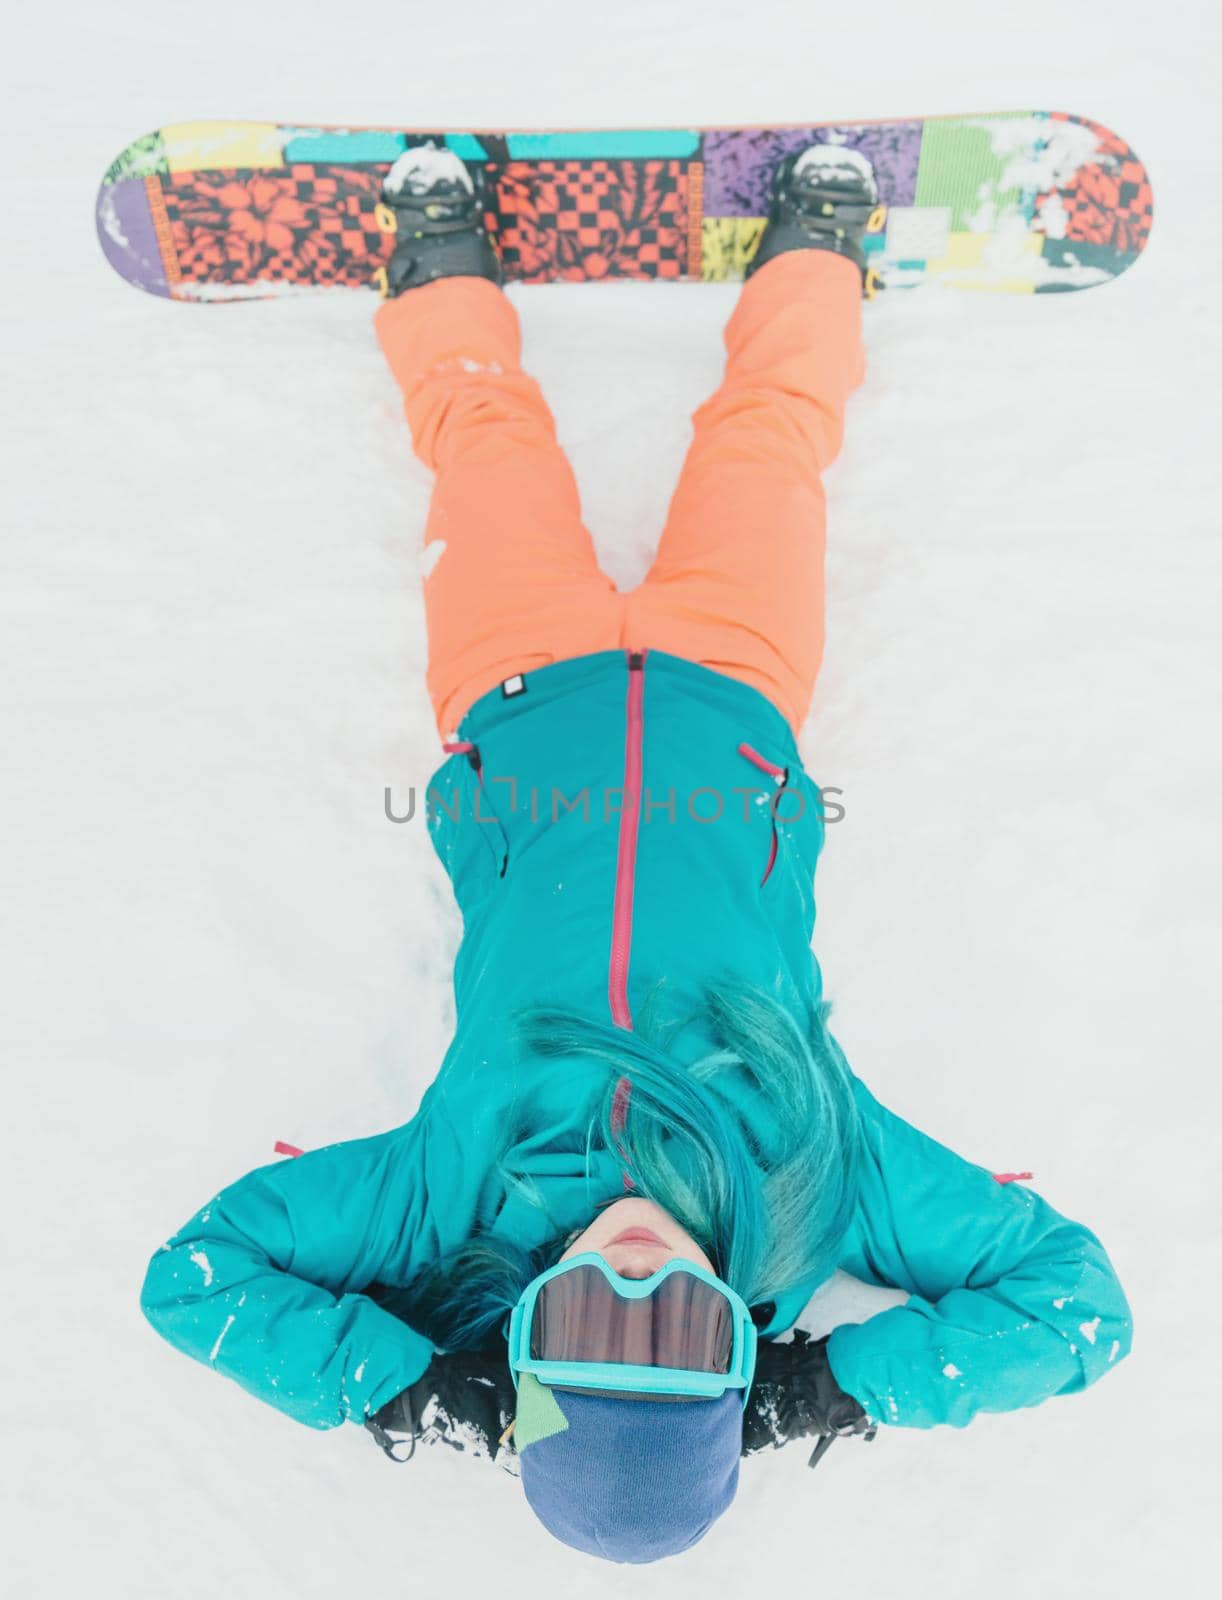 Young woman in protective sunglasses with snowboard lying on snow, top view